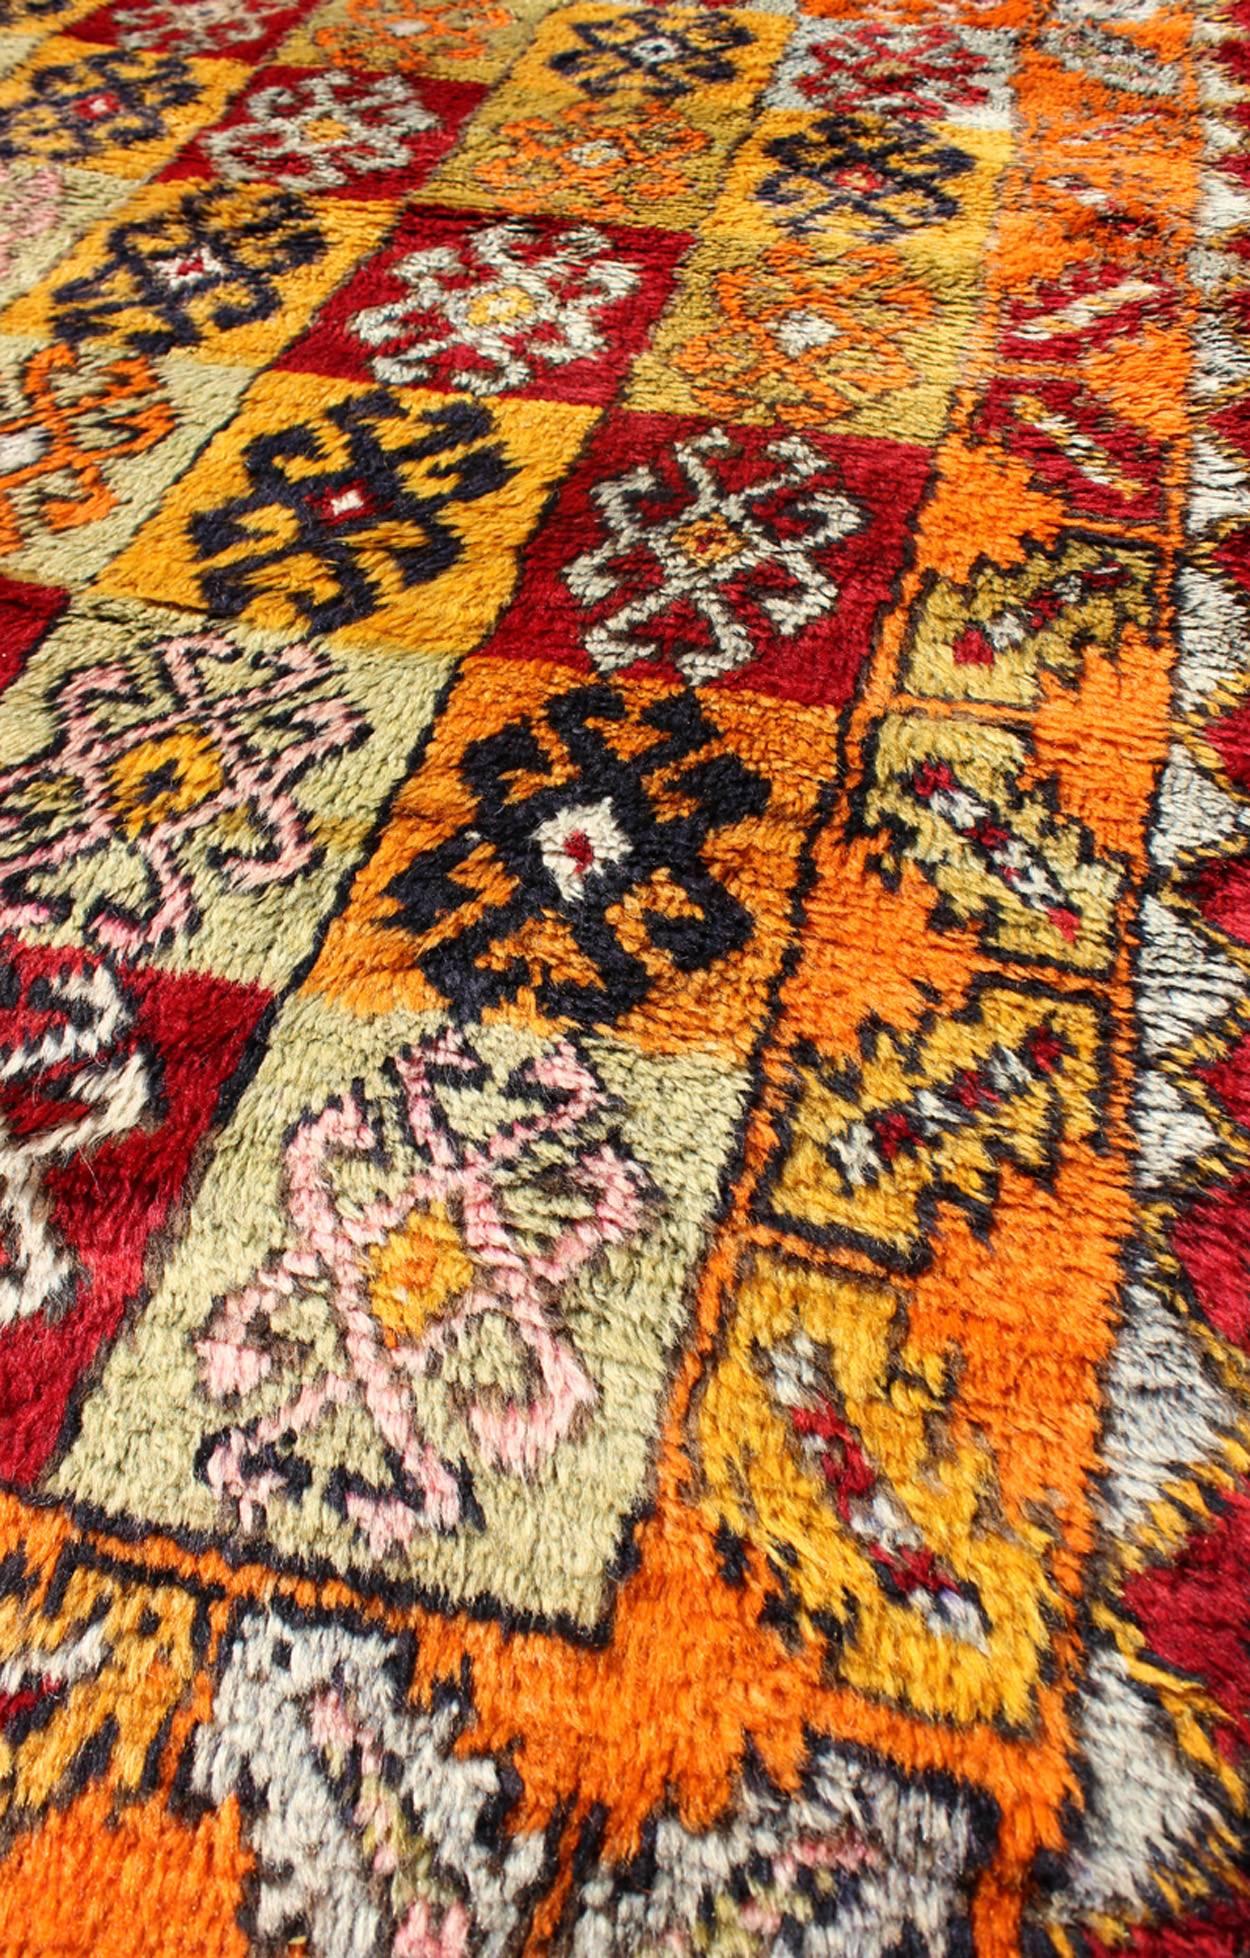 Mid-20th Century Tribal Checkerboard Design Vintage Turkish Tulu Rug with Bright Multi-Colors For Sale